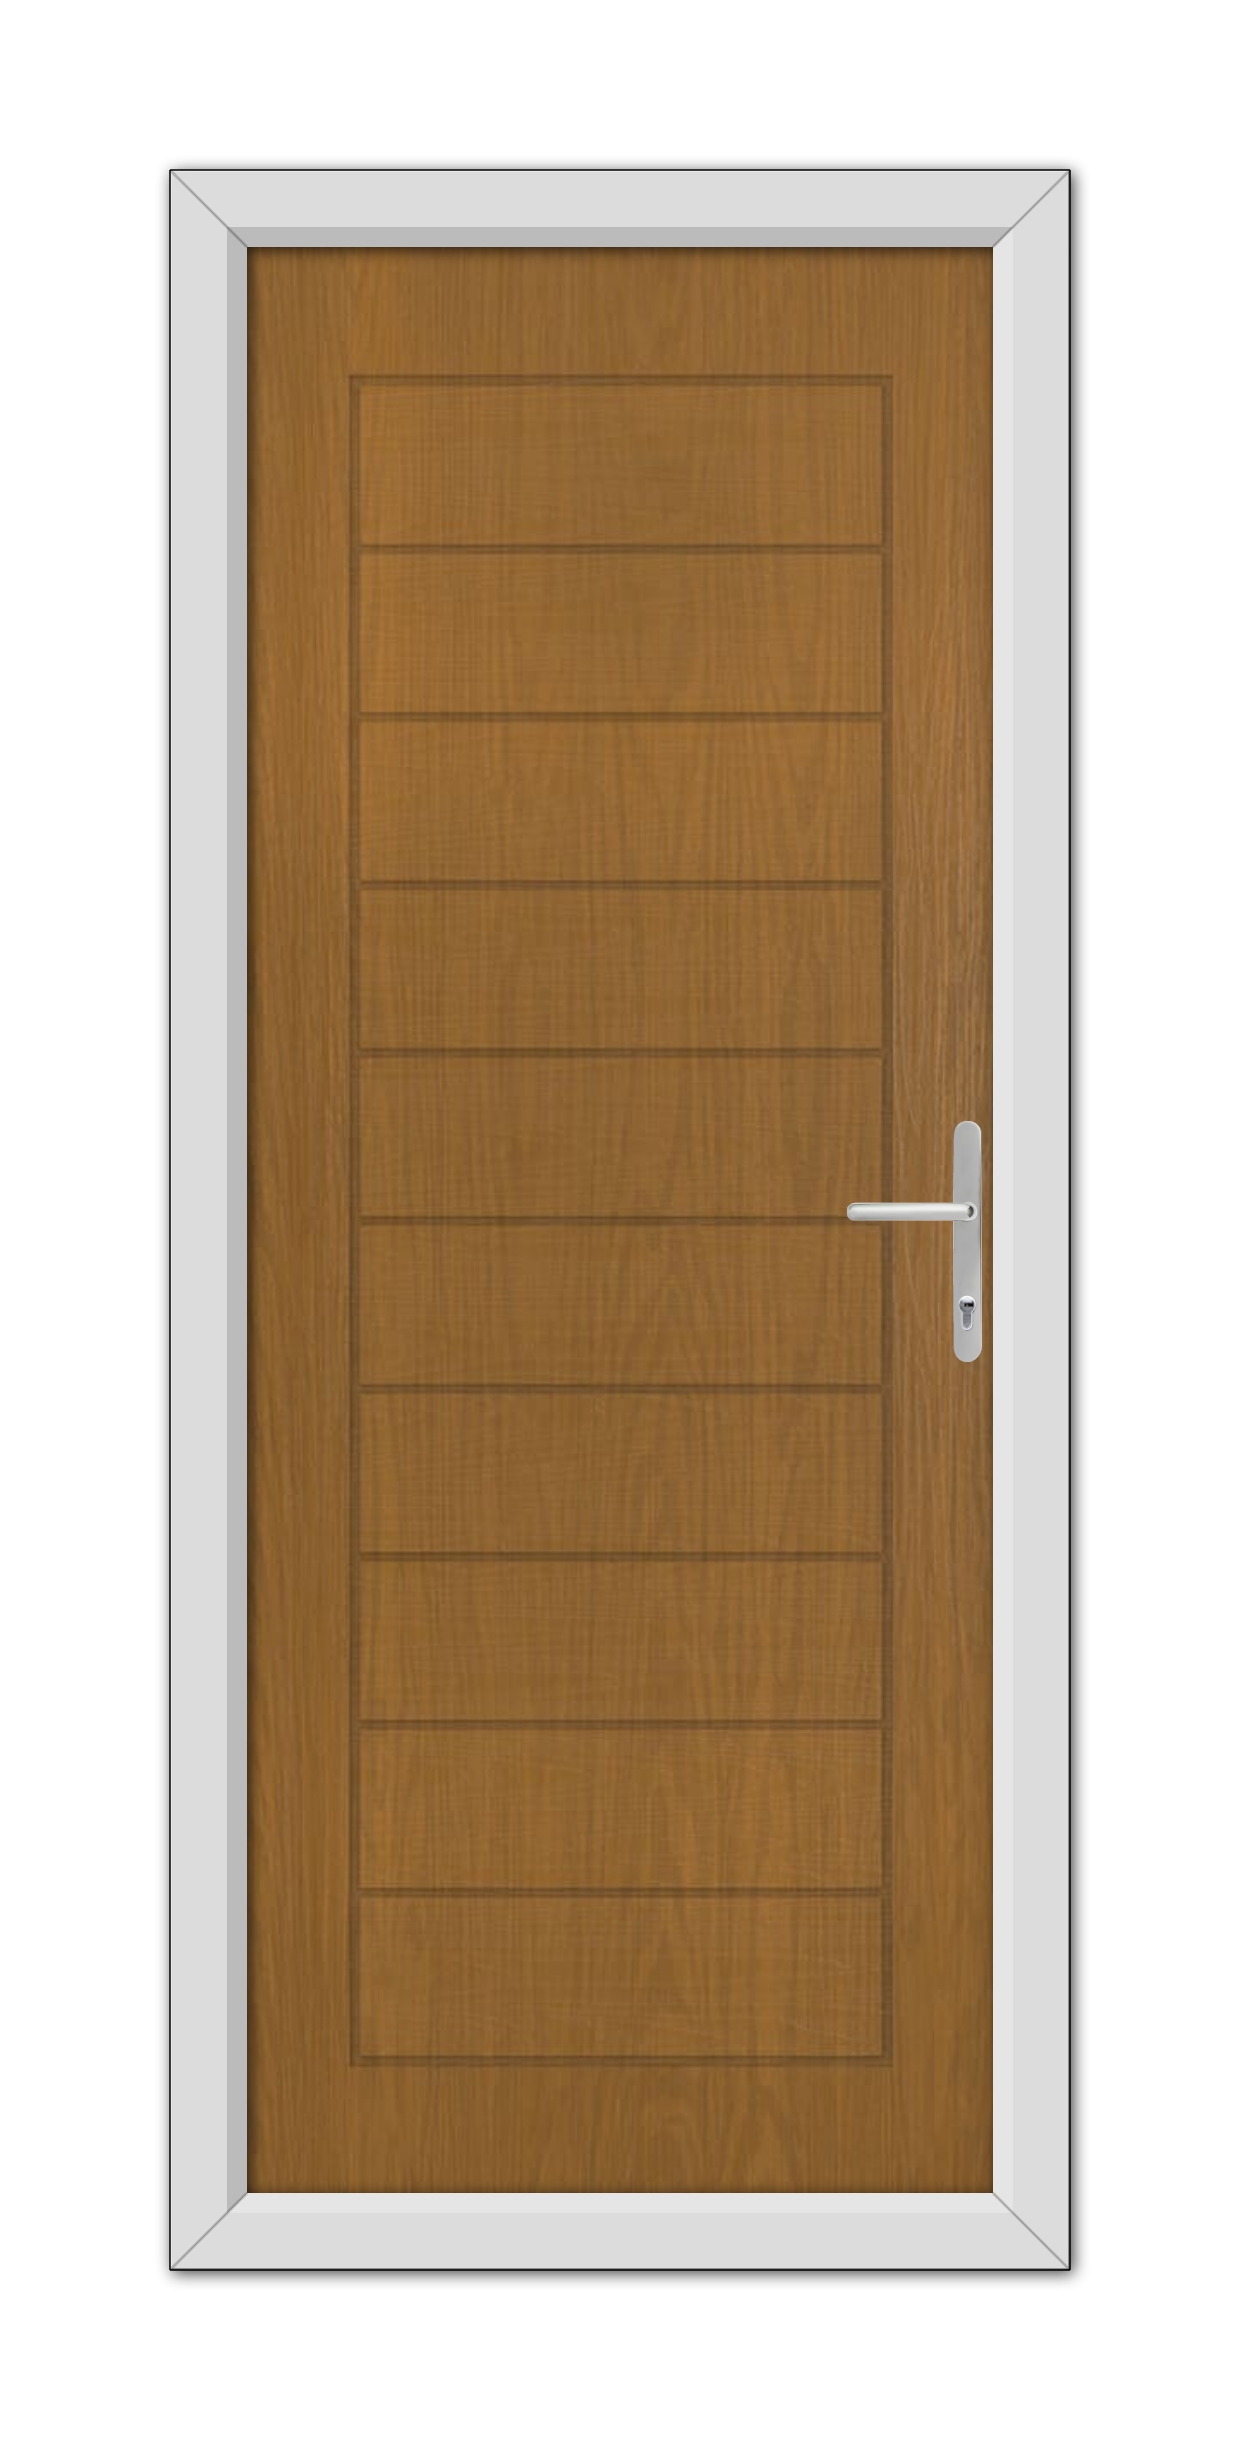 A closed Oak Cambridge Composite Door 48mm Timber Core with a metal handle, set within a white door frame, viewed frontally.